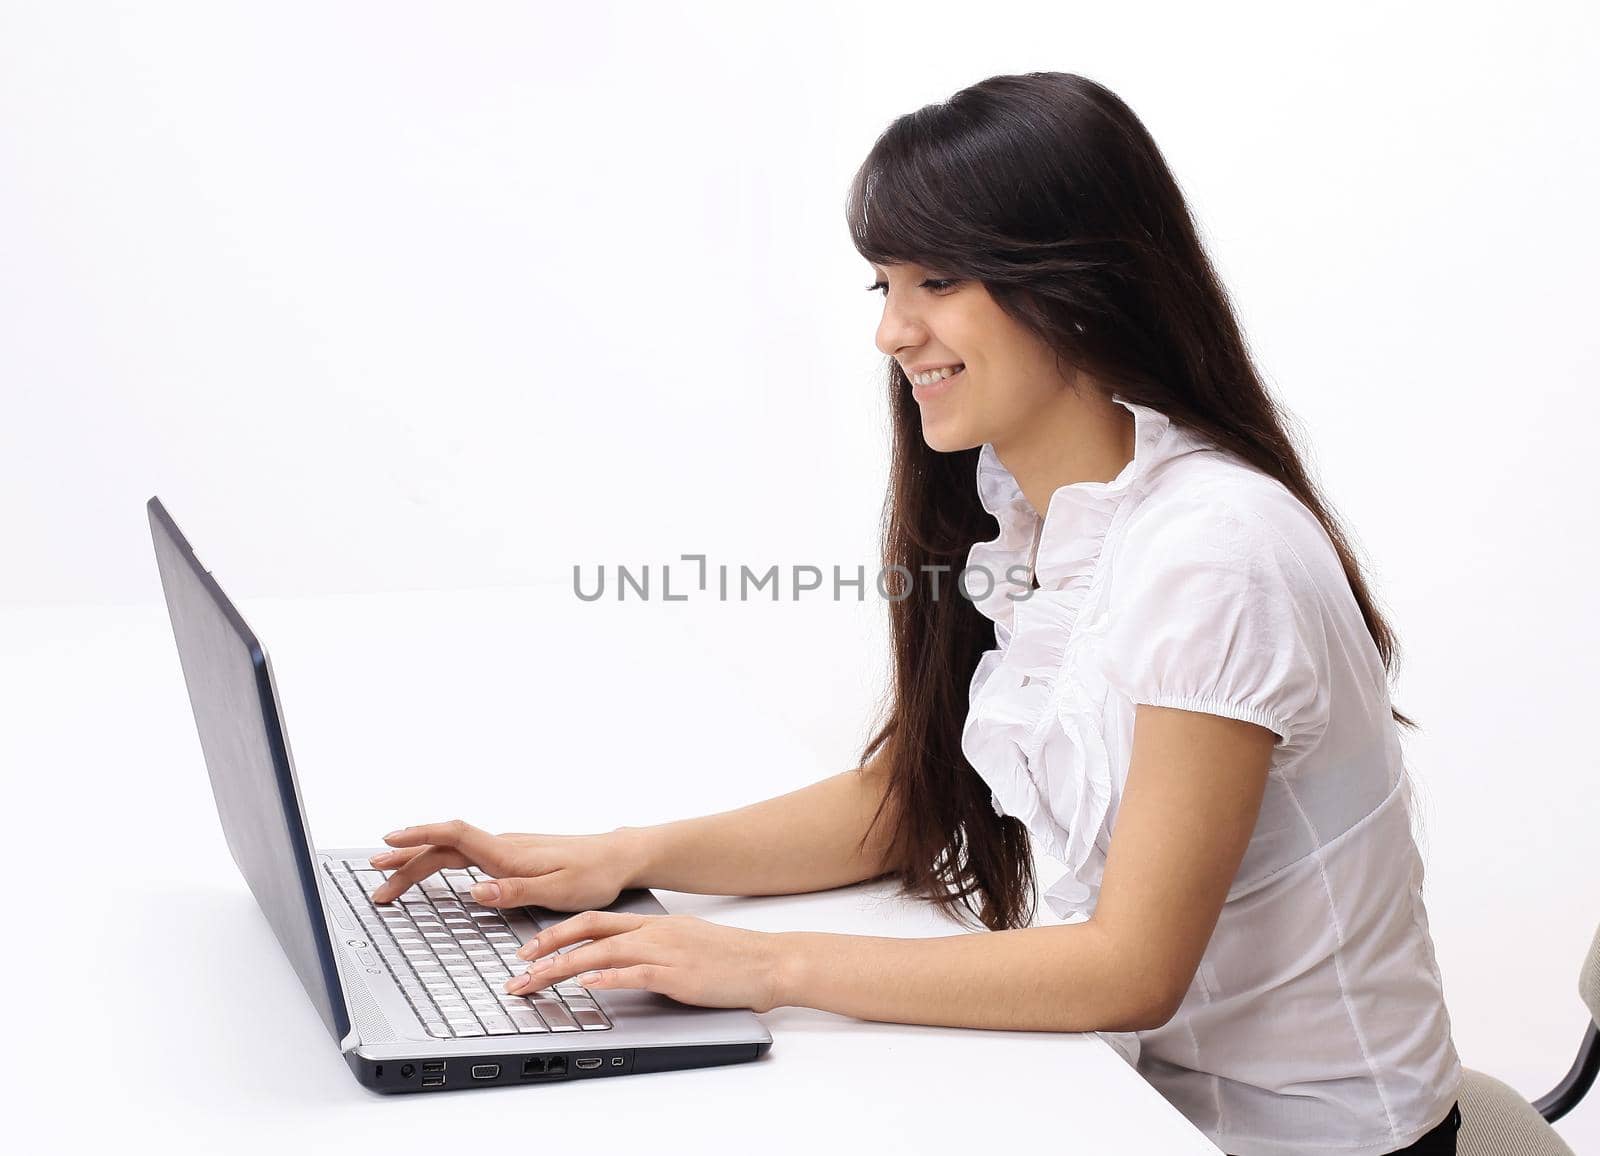 young woman typing text on laptop keyboard.isolated on white background